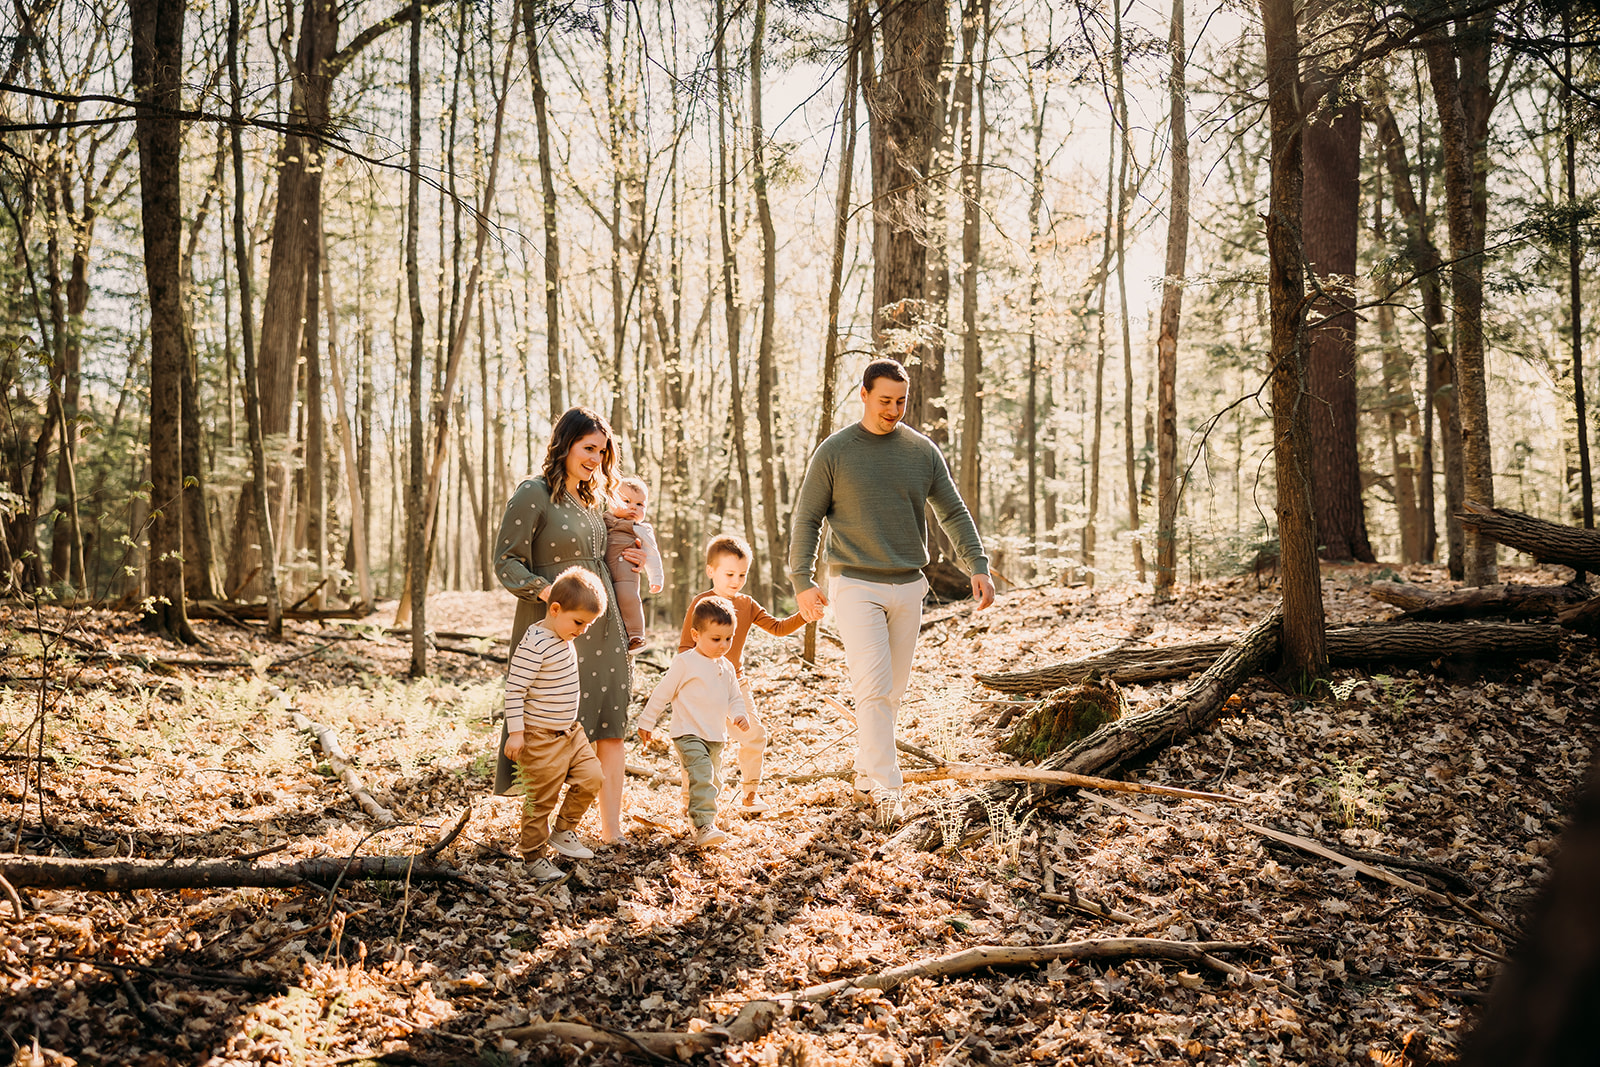 Memorable family photoshoot in the scenic Ottawa Forest